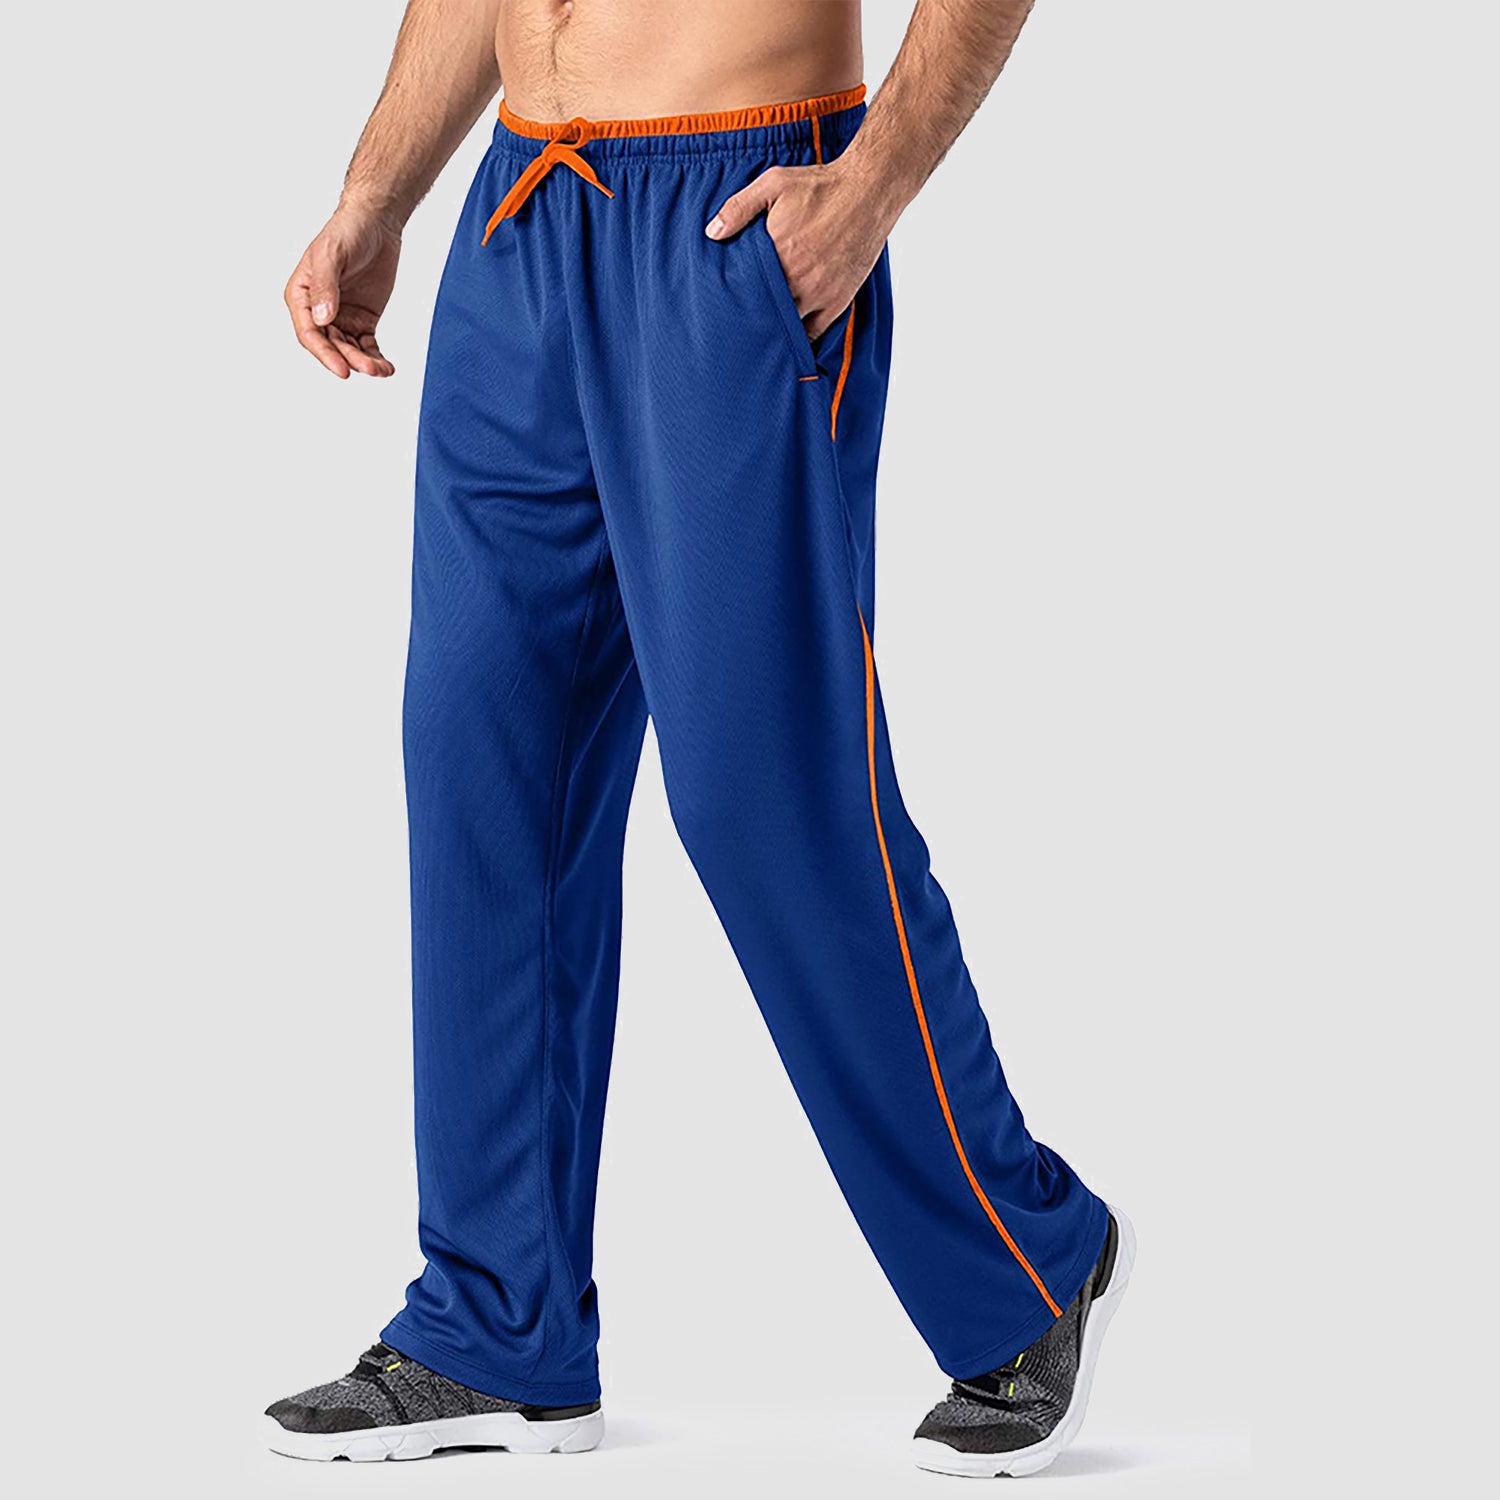 Lightweight Mesh Athletic Sweatpants for Men with Zipper Pockets and  Adjustable Waist | Perfect for Workout, Training, and Daily Wear